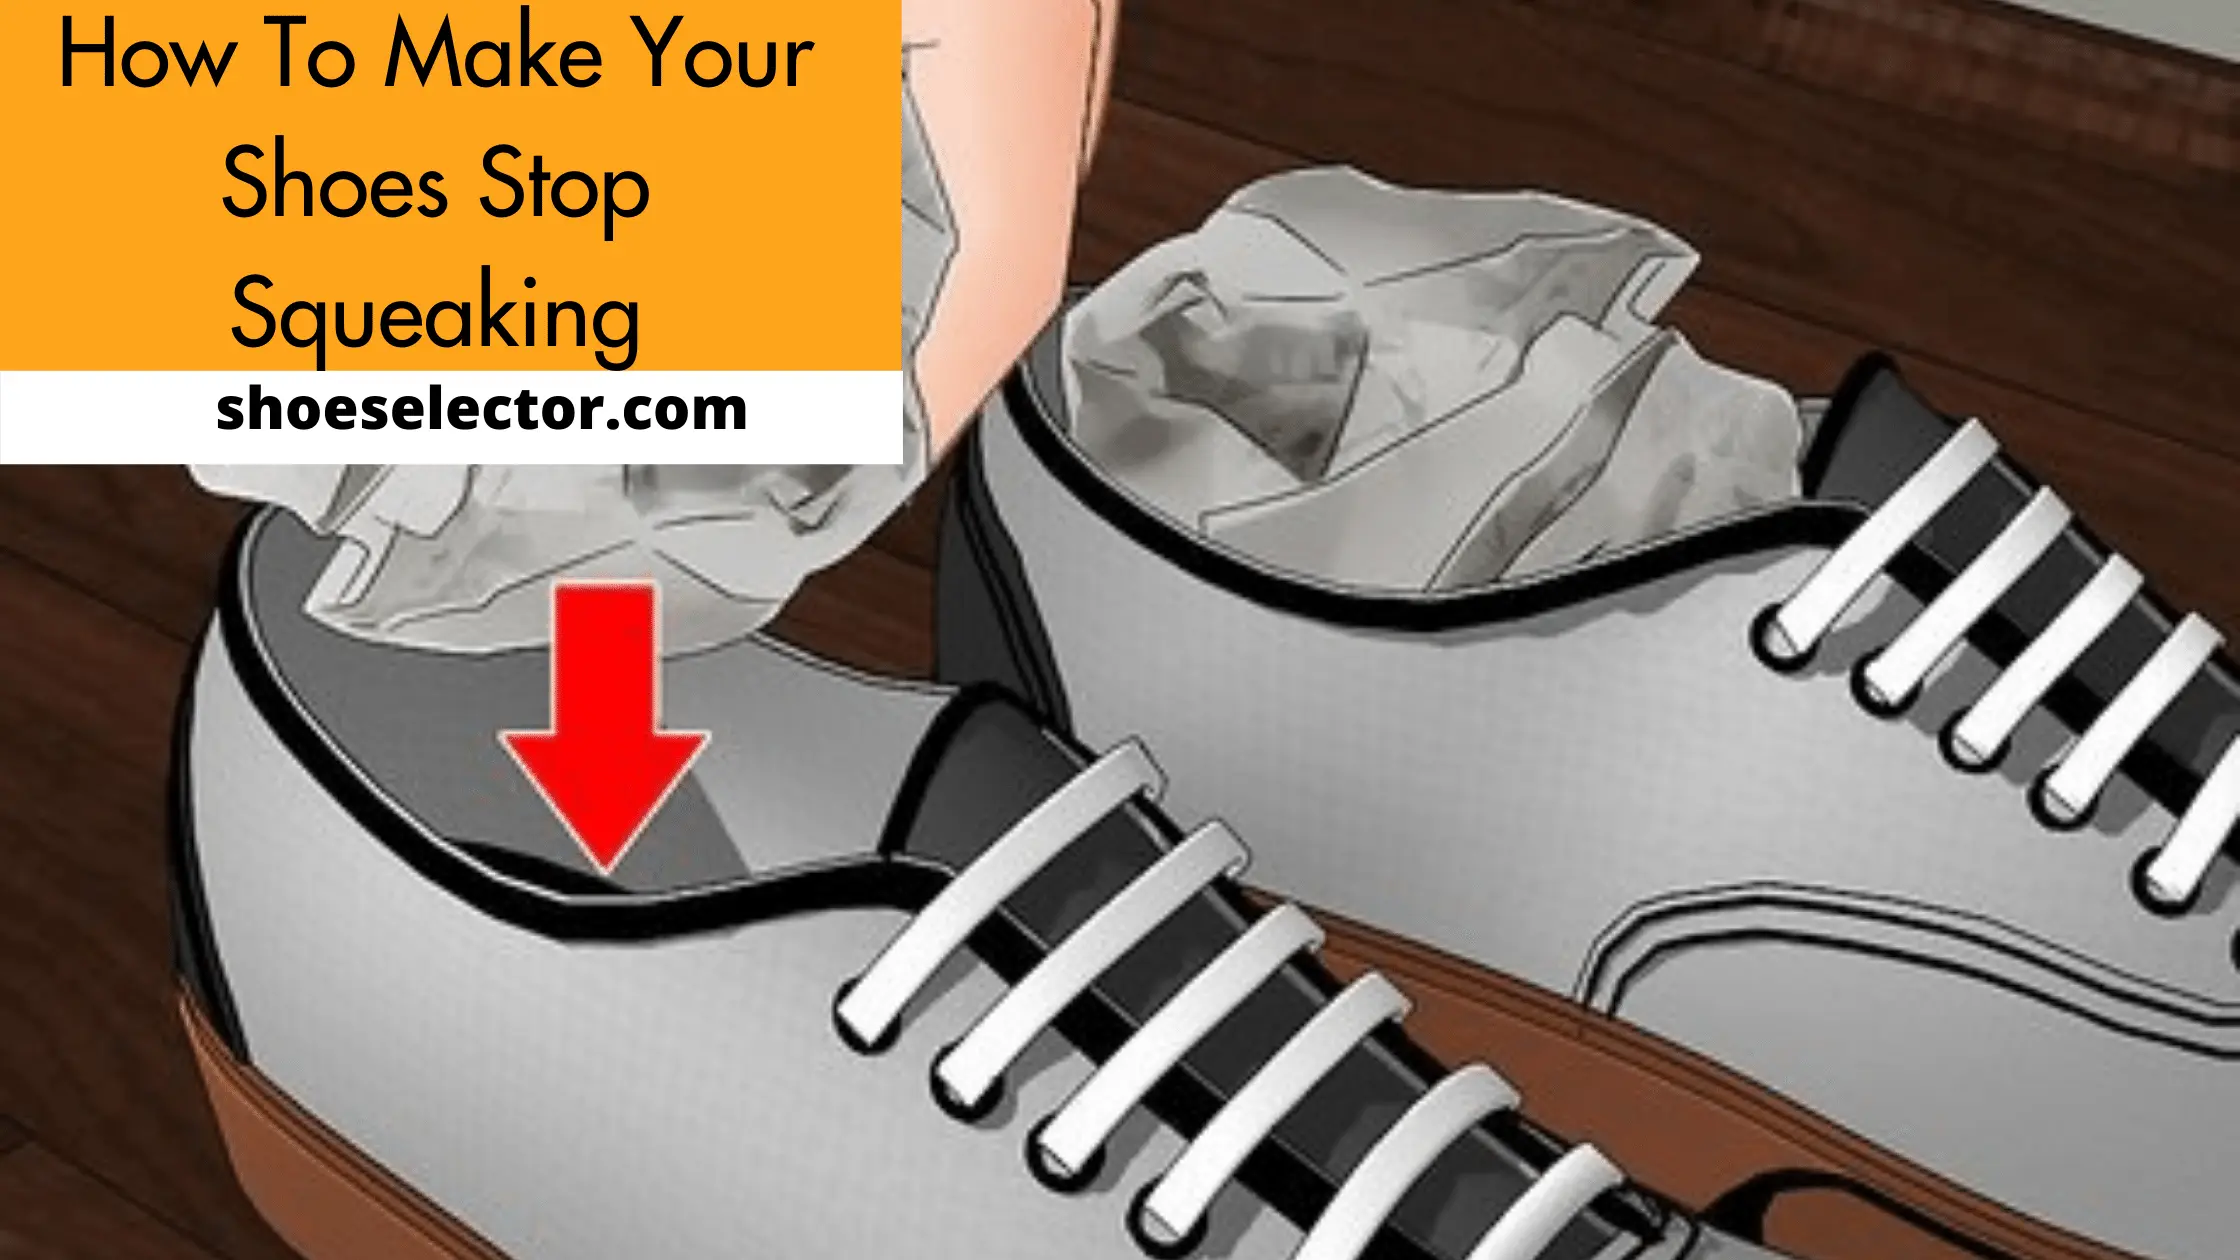 How To Make Your Shoes Stop Squeaking? Top Recommended Guide